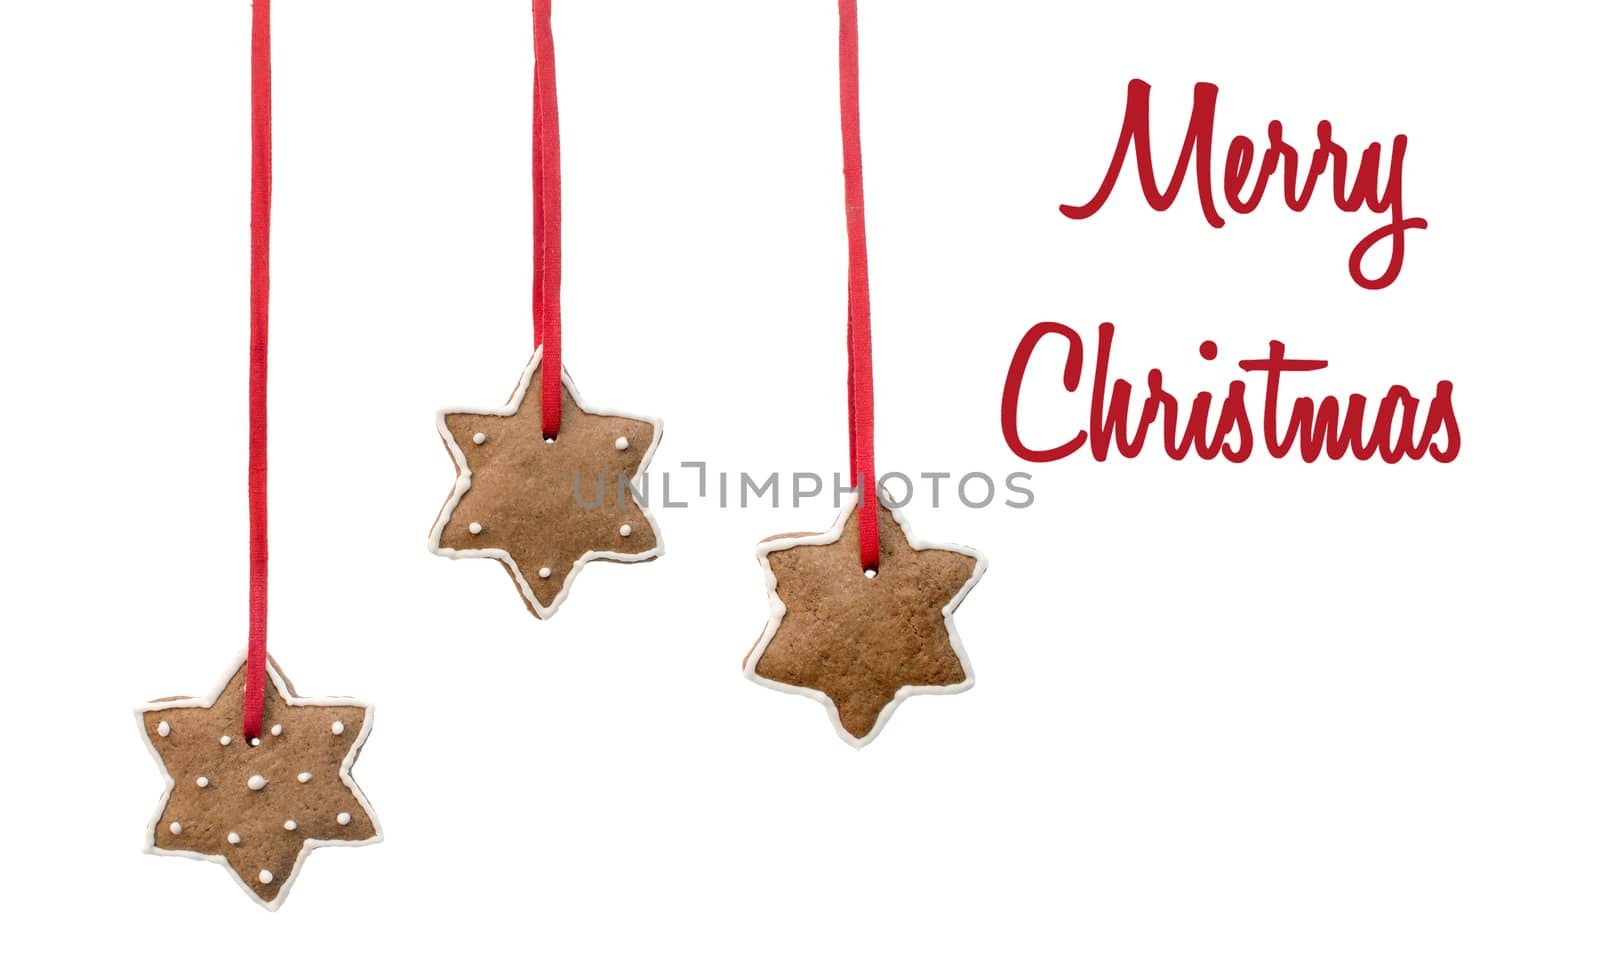 Three gingerbread stars hanging on red ribbons and text beside.